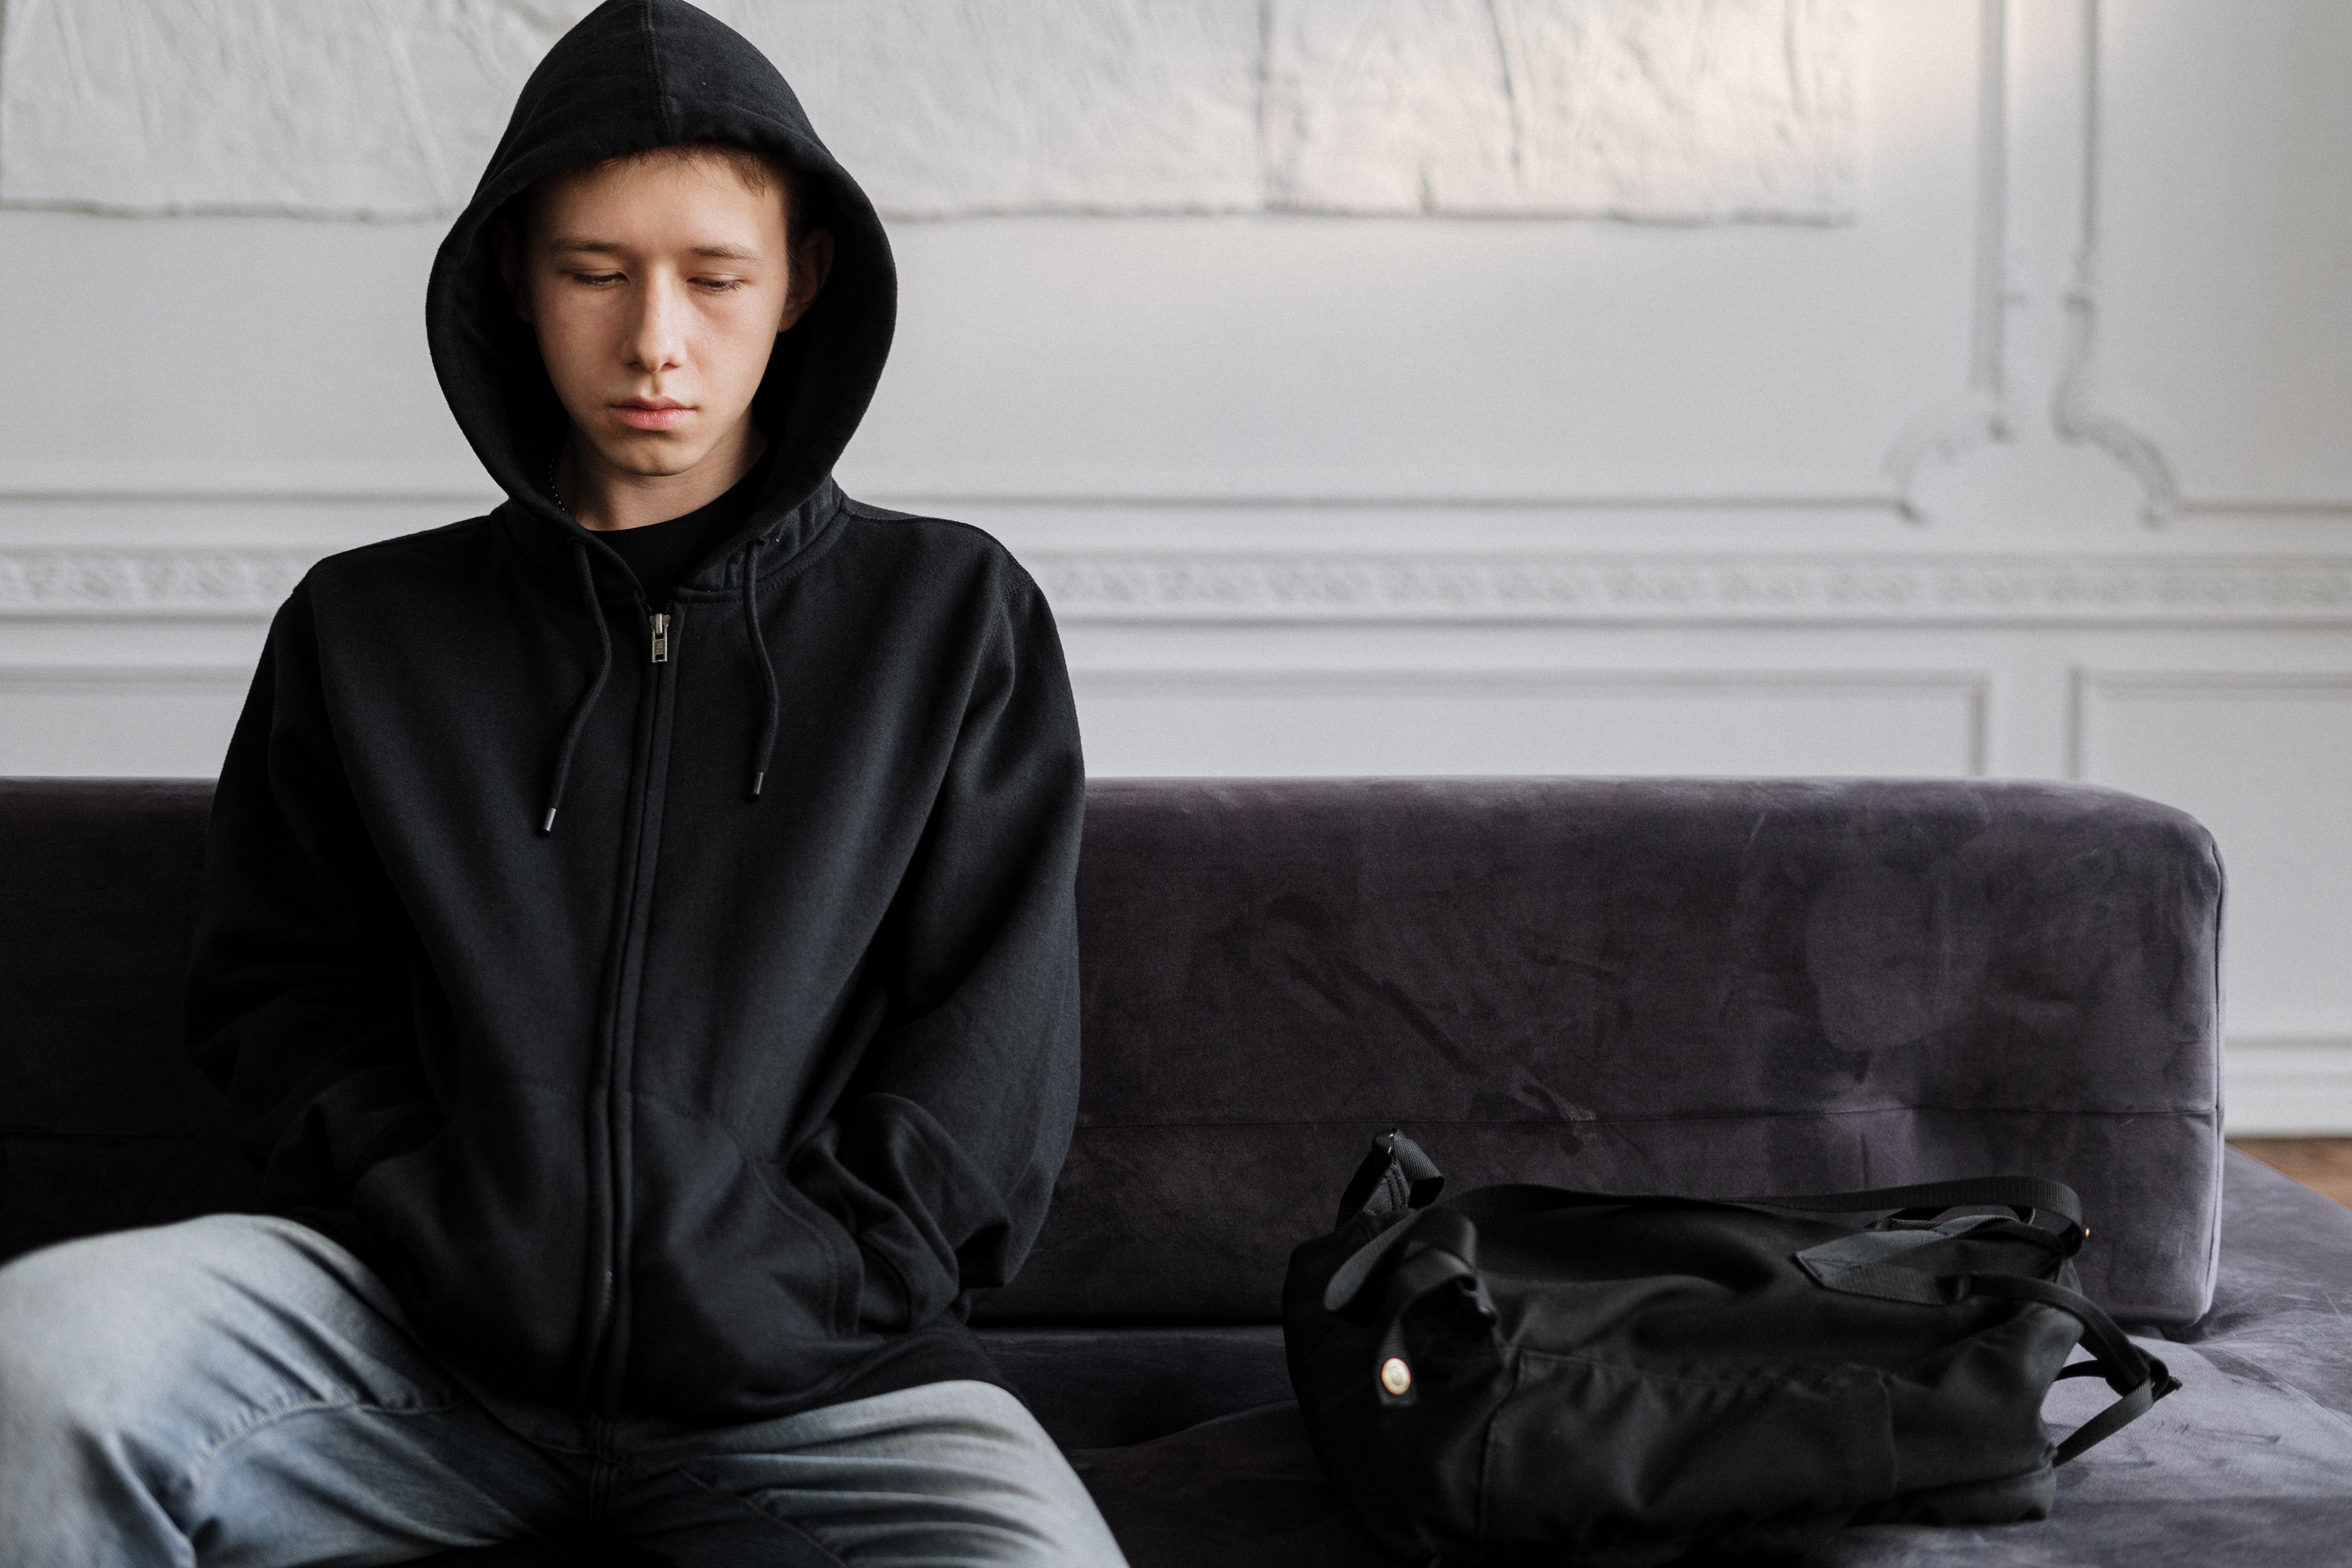 Young person looking down wearing hooded jumper